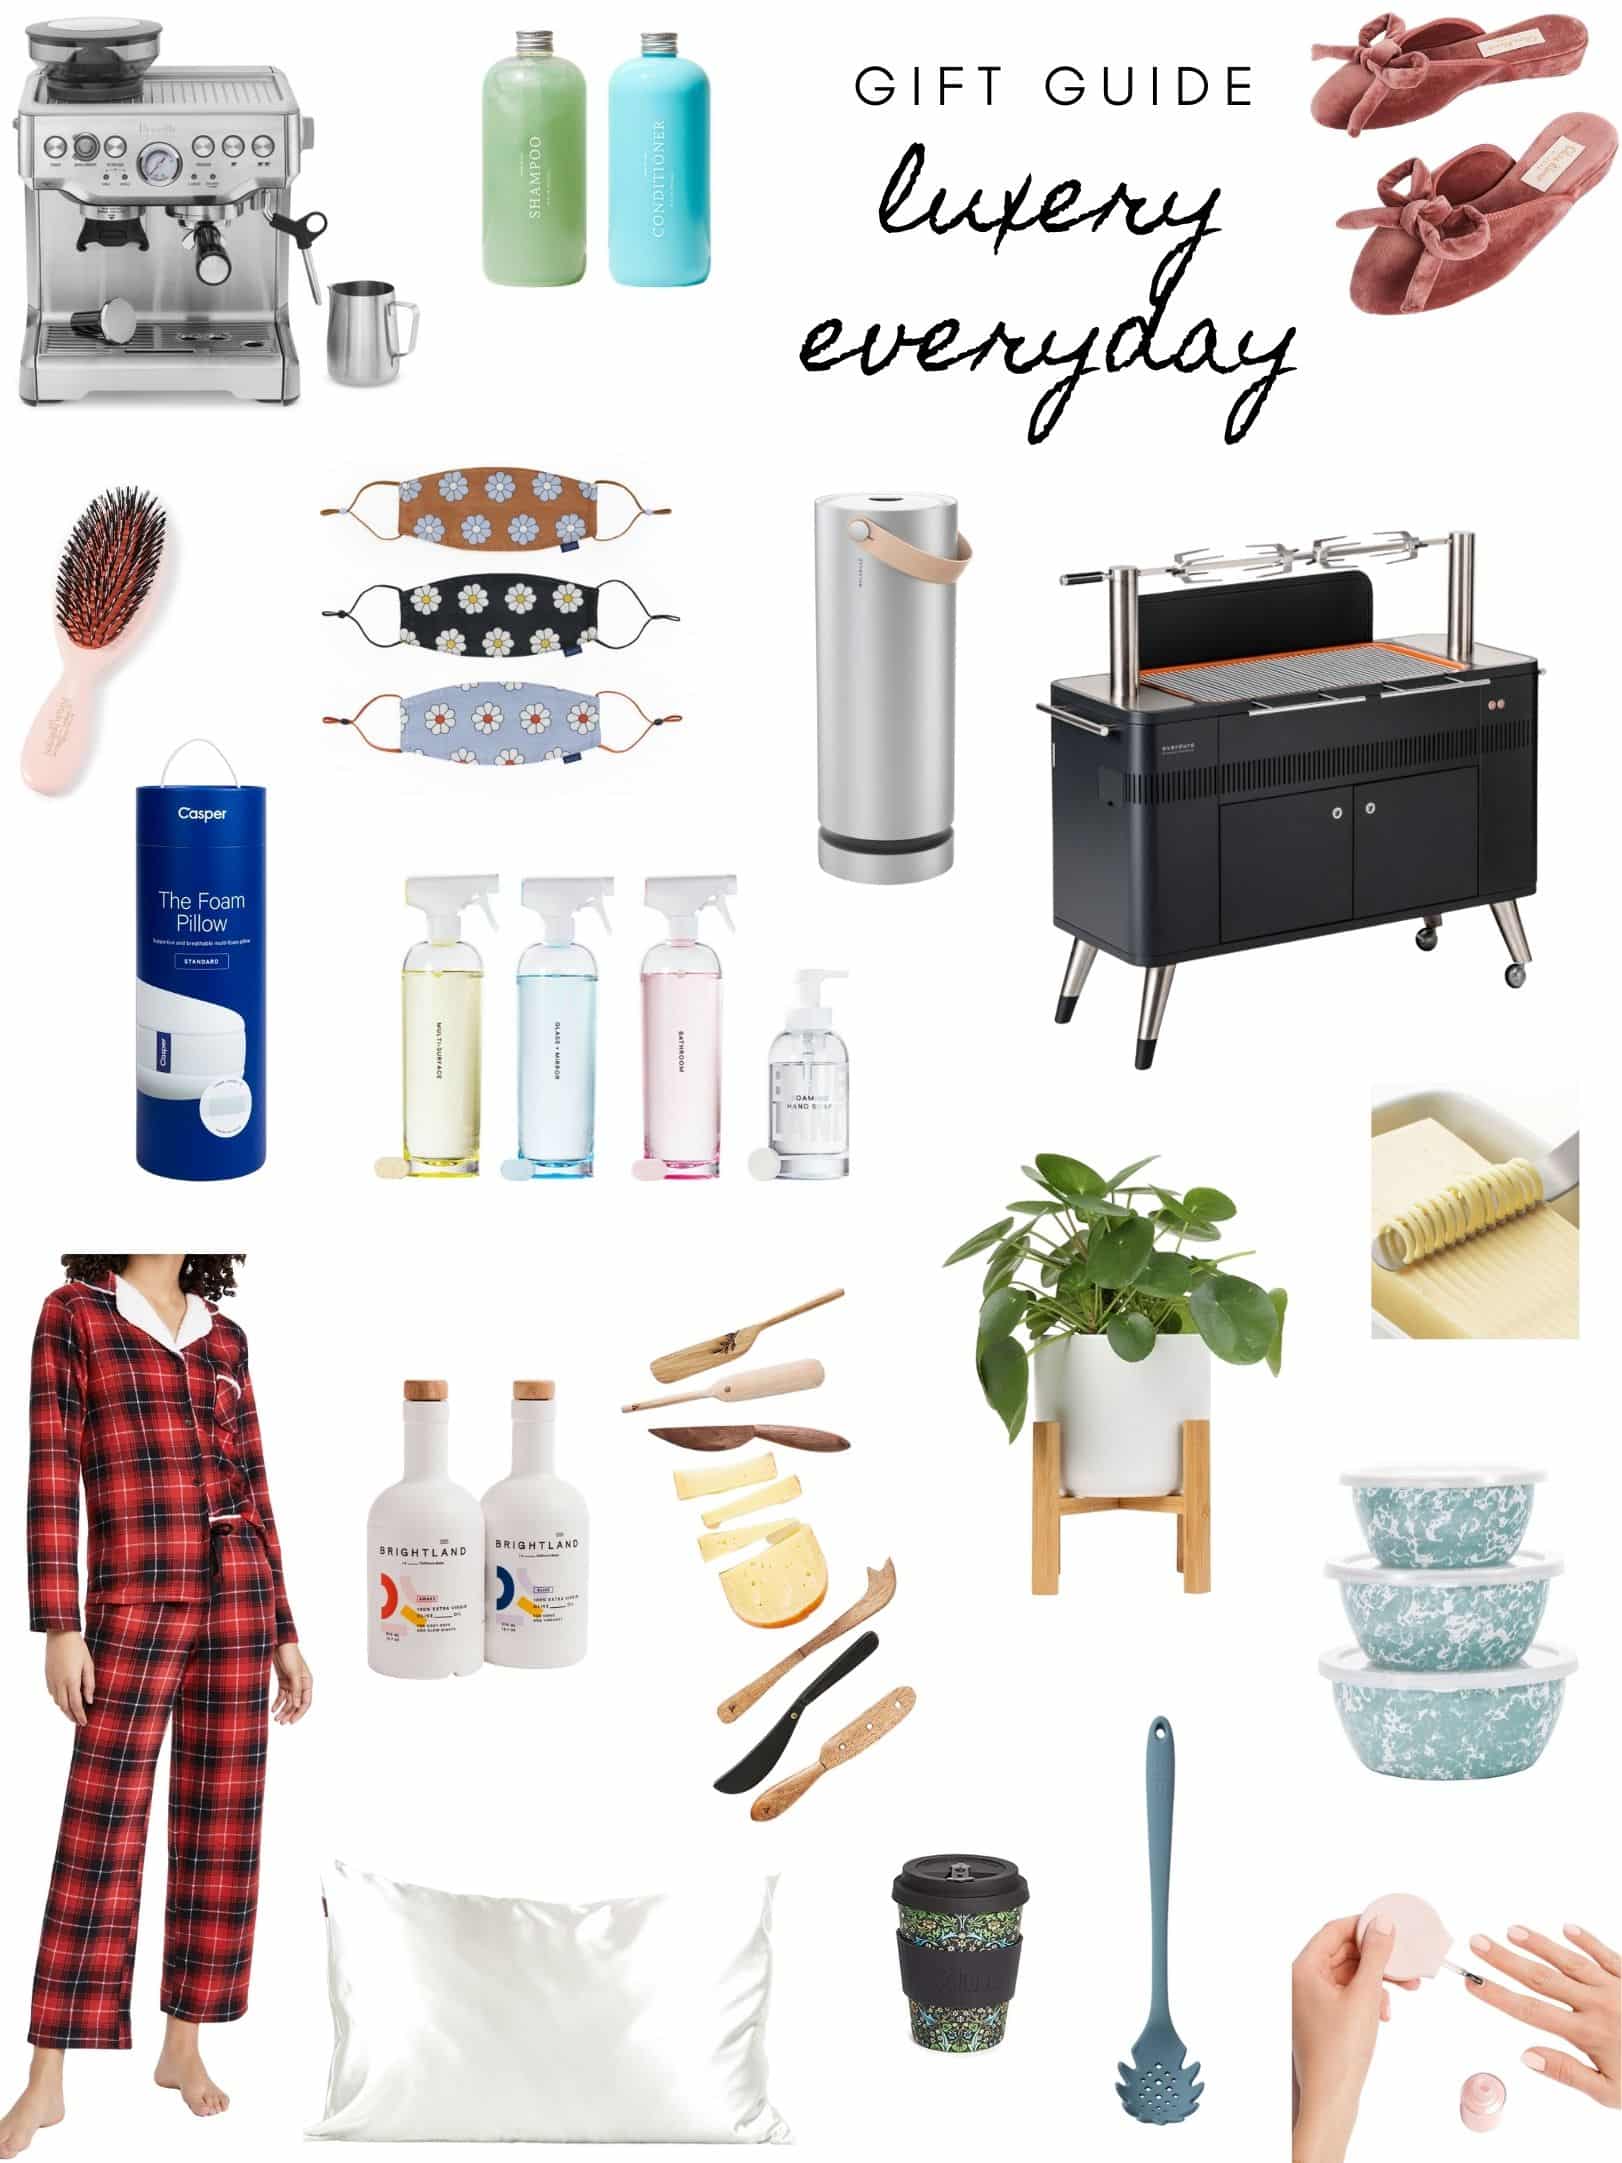 Gift Guide : Home Utility - A Daily Something